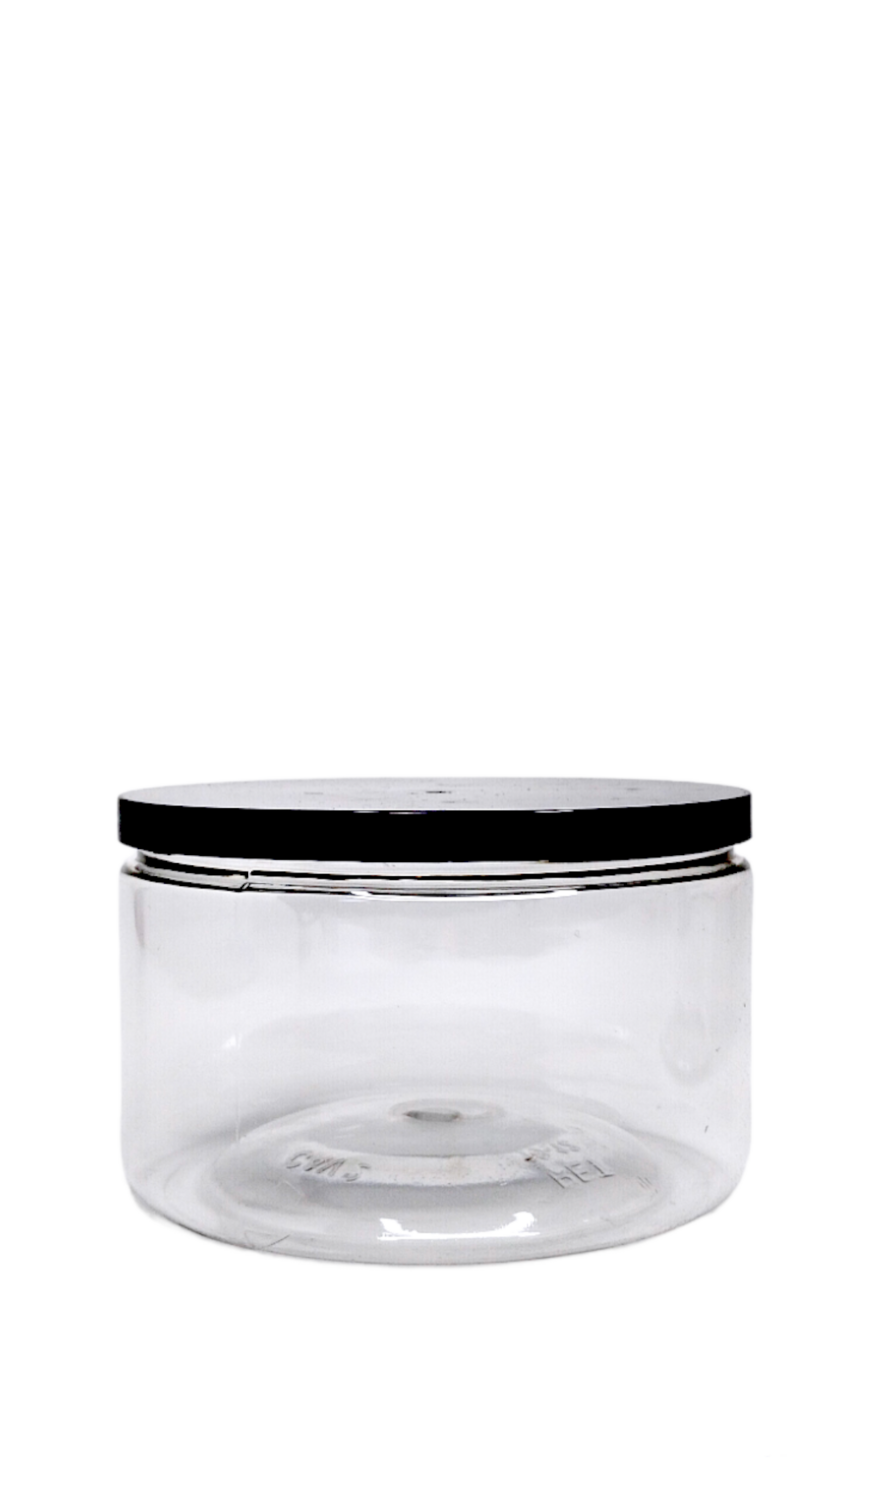 440ml PET Clear Widemouth Jar with Liner- Black Cap